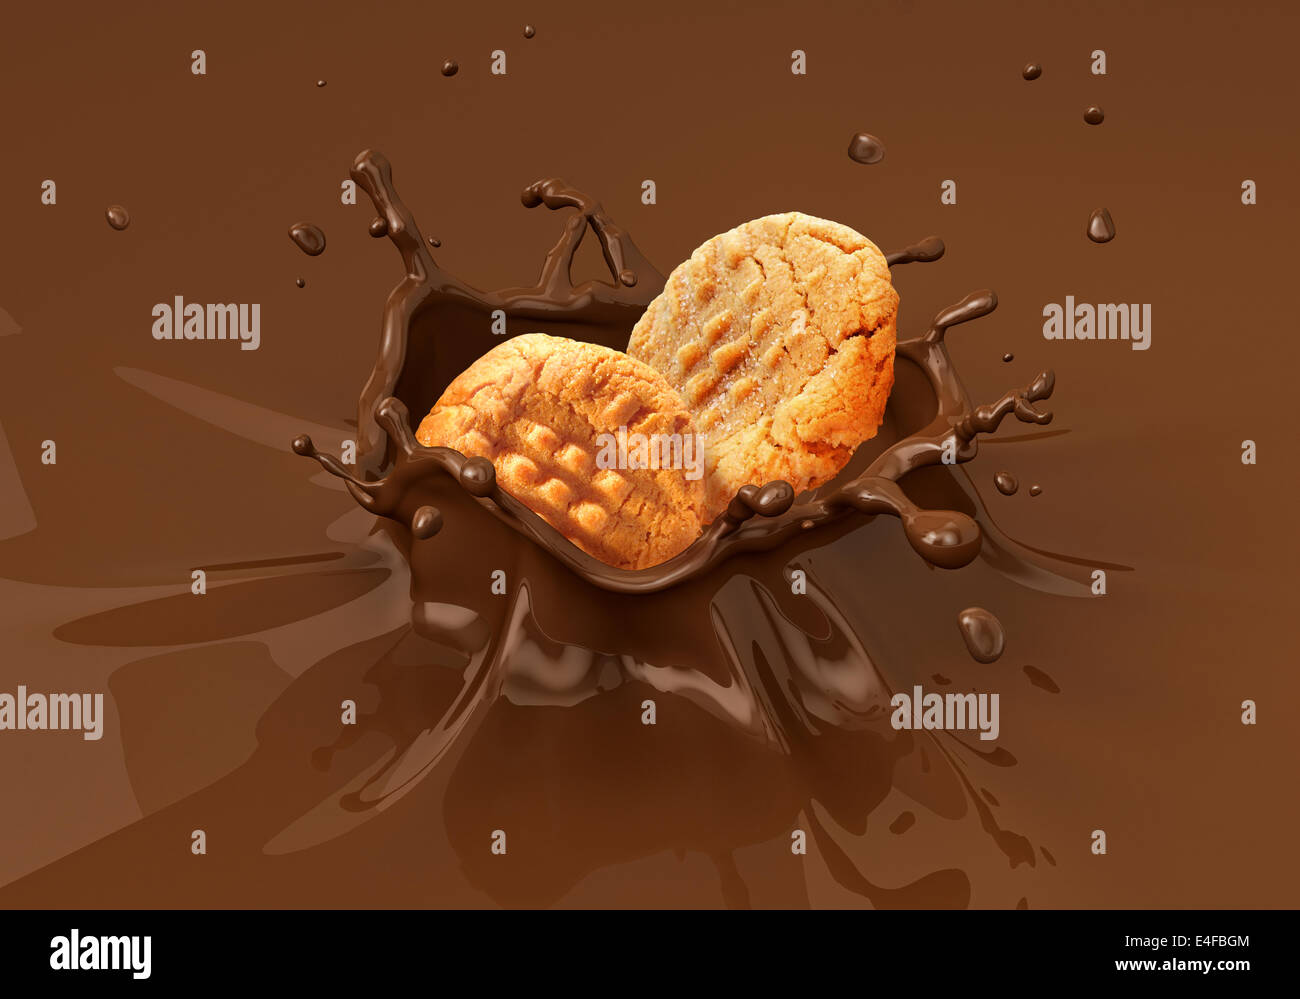 Two cookies biscuits falling into liquid chocolate splashing. Close up view. Stock Photo